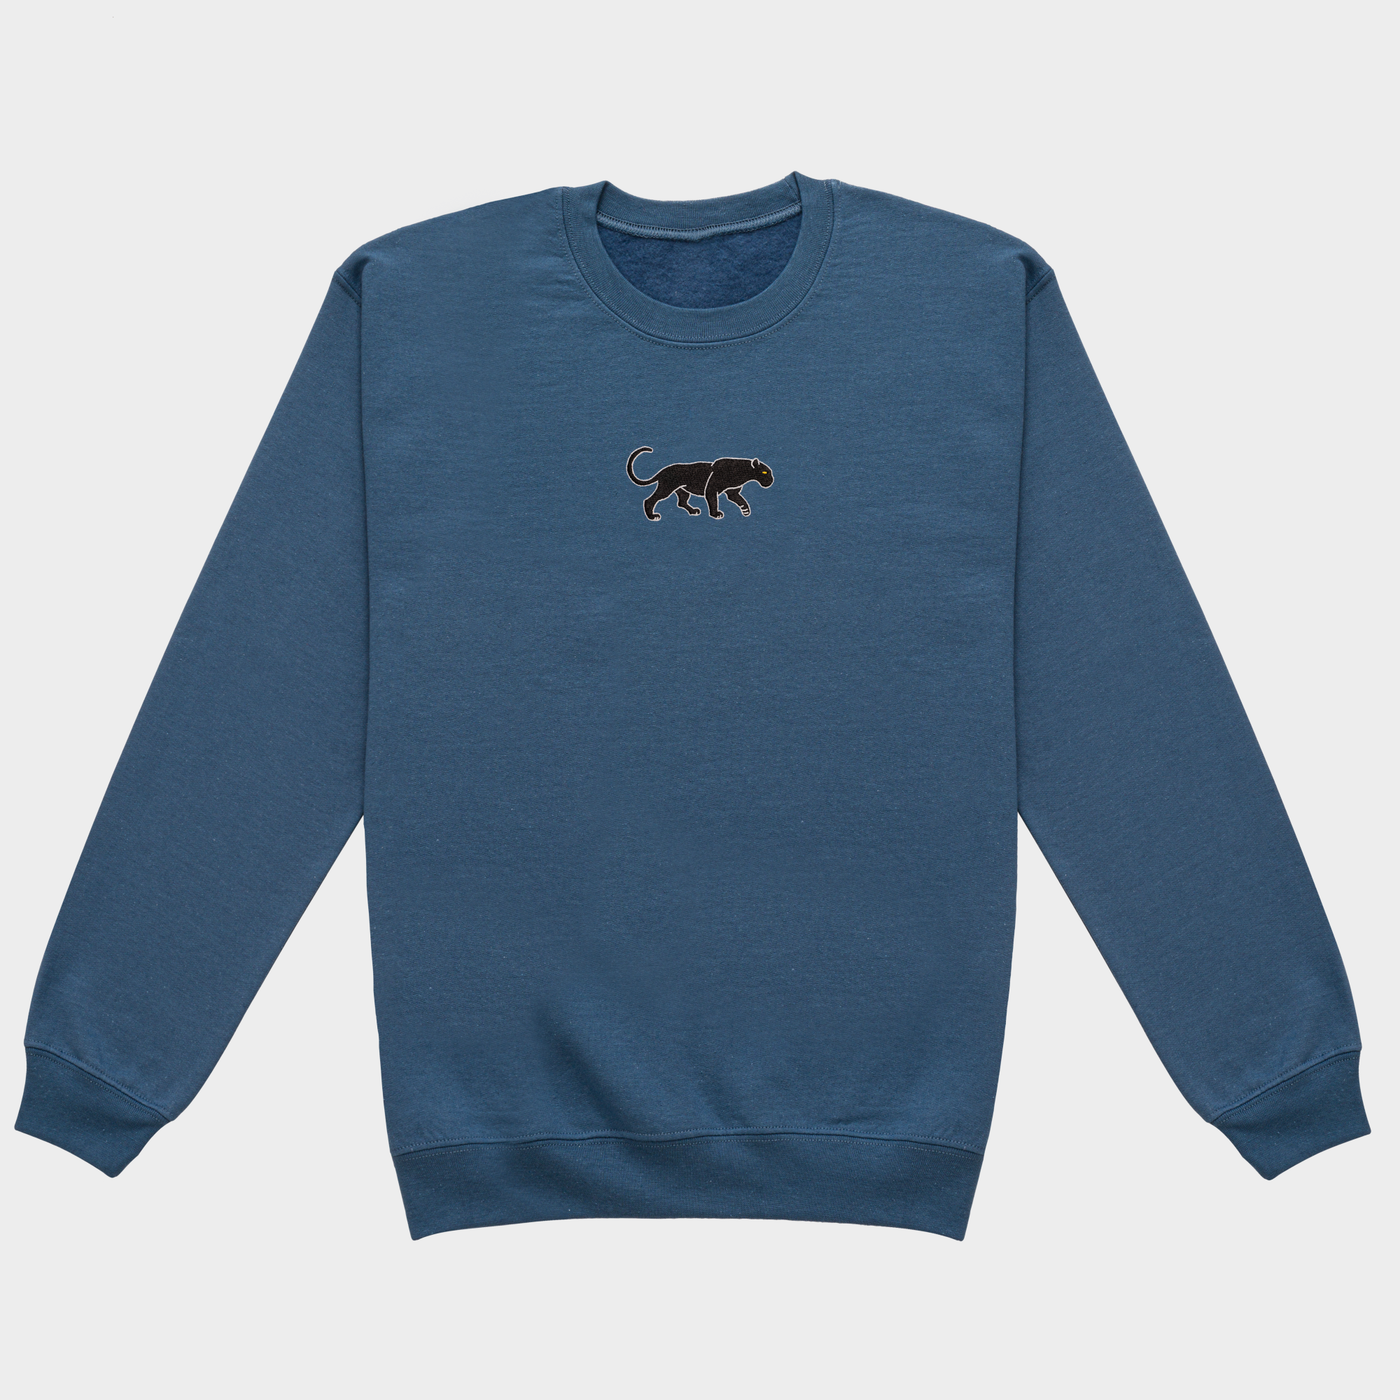 Bobby's Planet Men's Embroidered Black Jaguar Sweatshirt from South American Amazon Animals Collection in Indigo Blue Color#color_indigo-blue